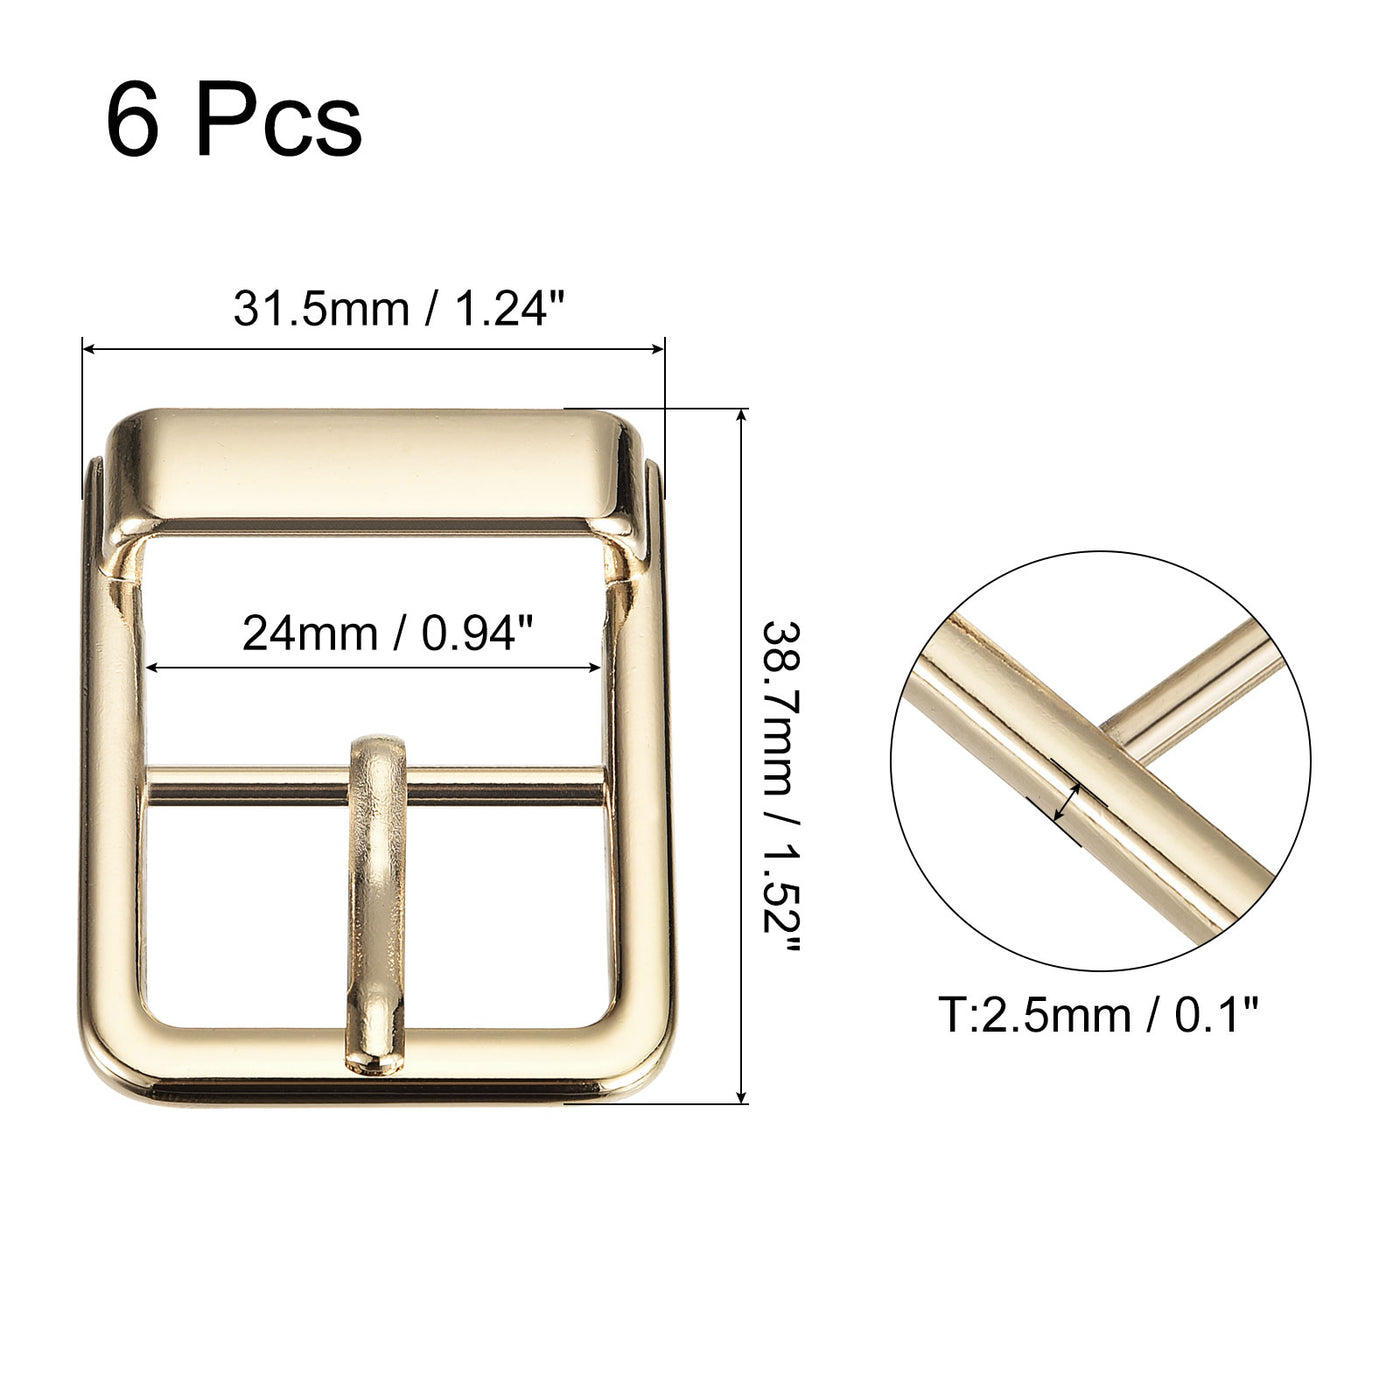 uxcell Uxcell 6Pcs 0.94" Single Prong Belt Buckle Square Center Bar Buckles for Belt, Gold